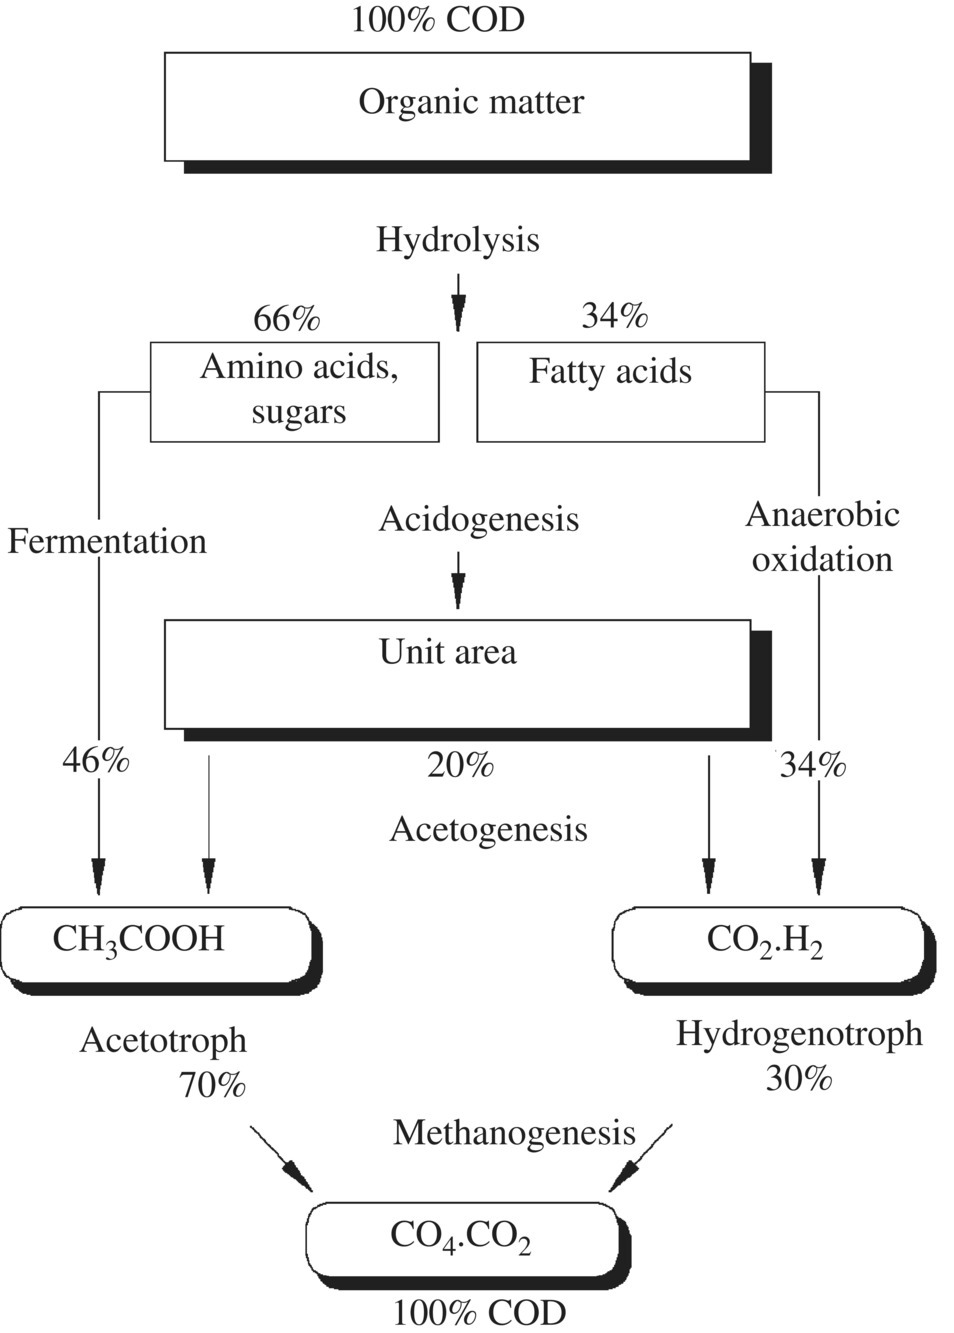 Flowchart illustrating the anaerobic degradation of organic compounds of leachate, starting from organic matter branching to amino acids and fatty acids, to unit area, leading to CO4.CO2.